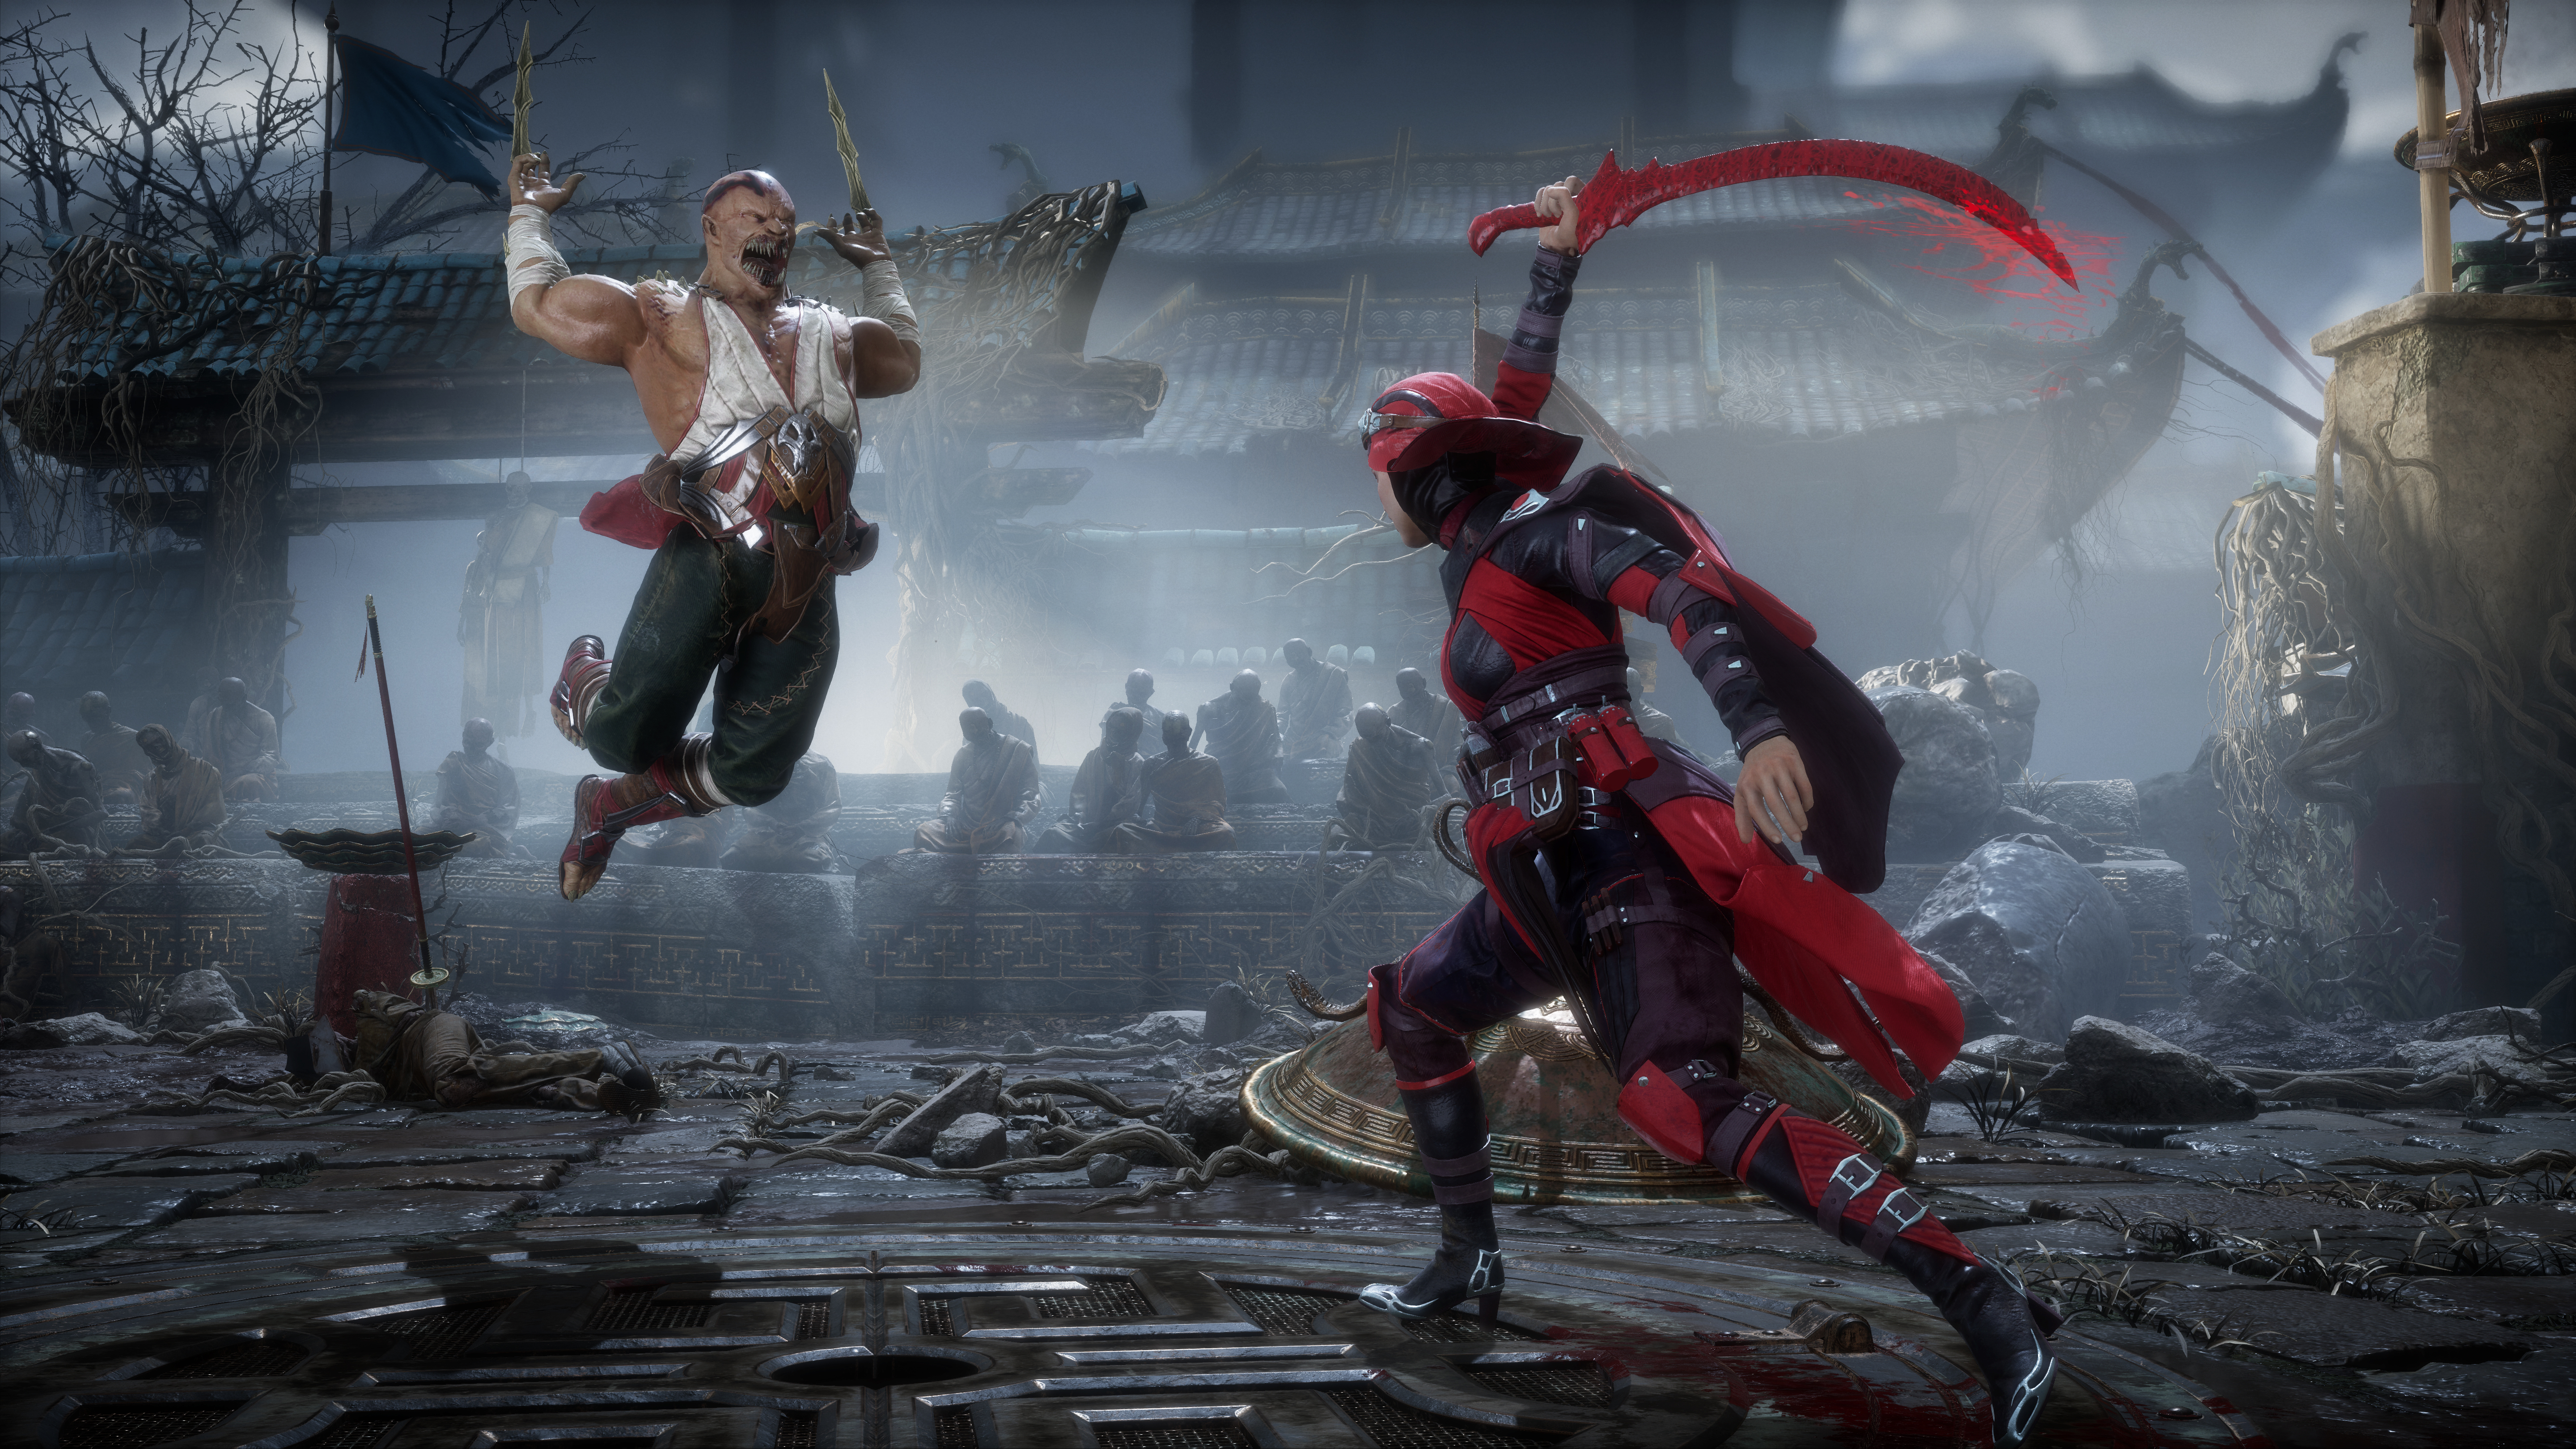 Mortal Kombat 11 is a game nearly 30 years in the making - The Verge